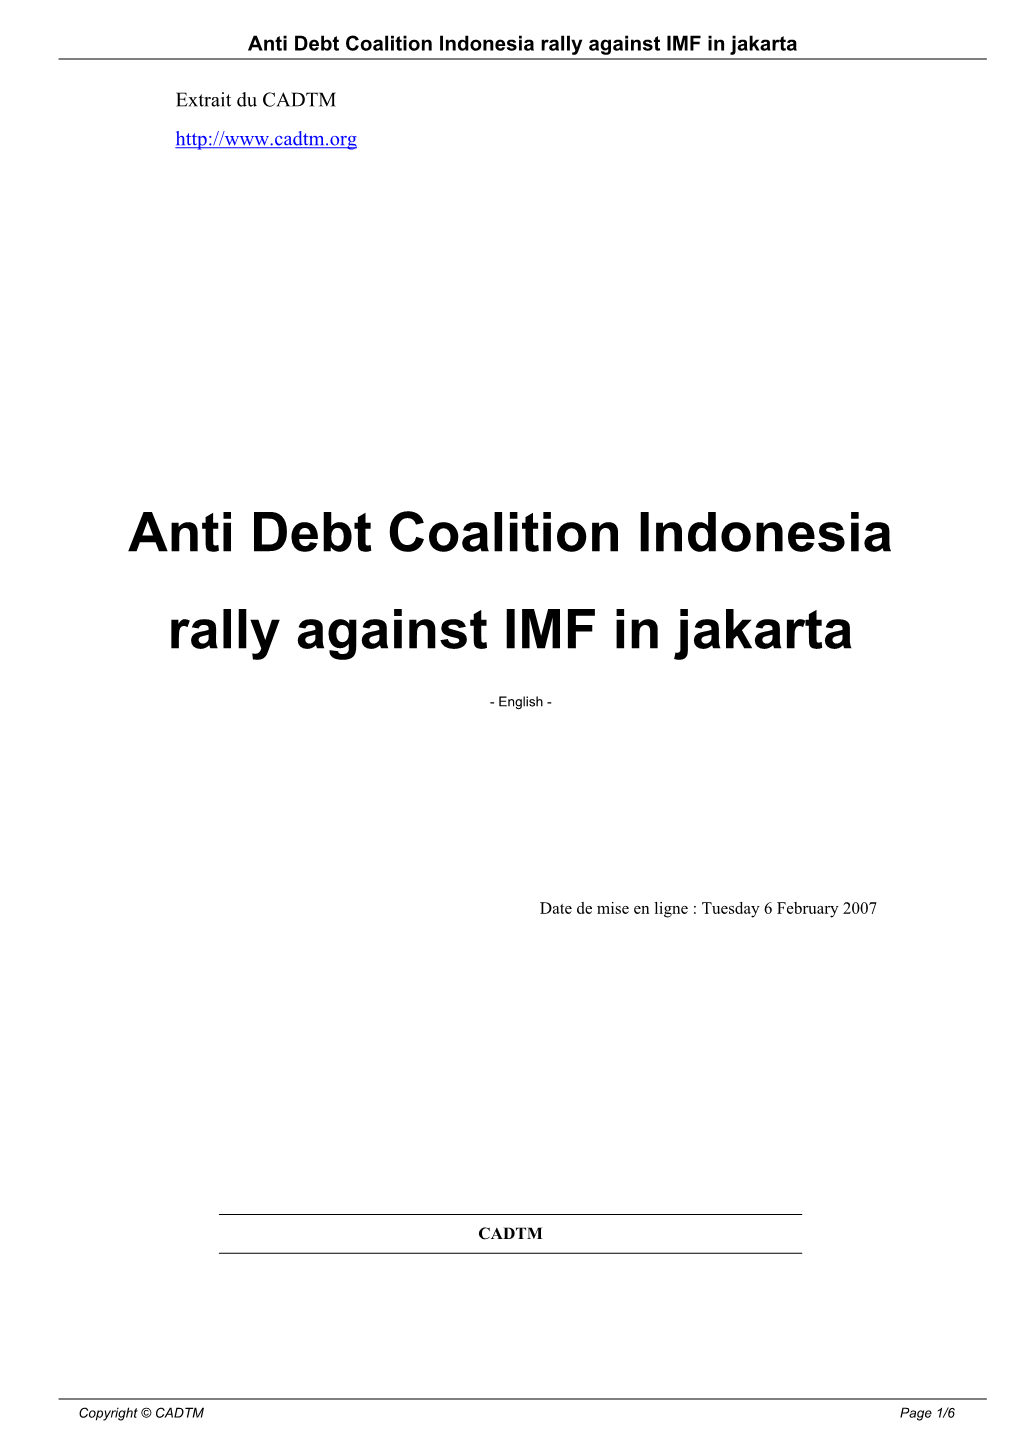 Anti Debt Coalition Indonesia Rally Against IMF in Jakarta